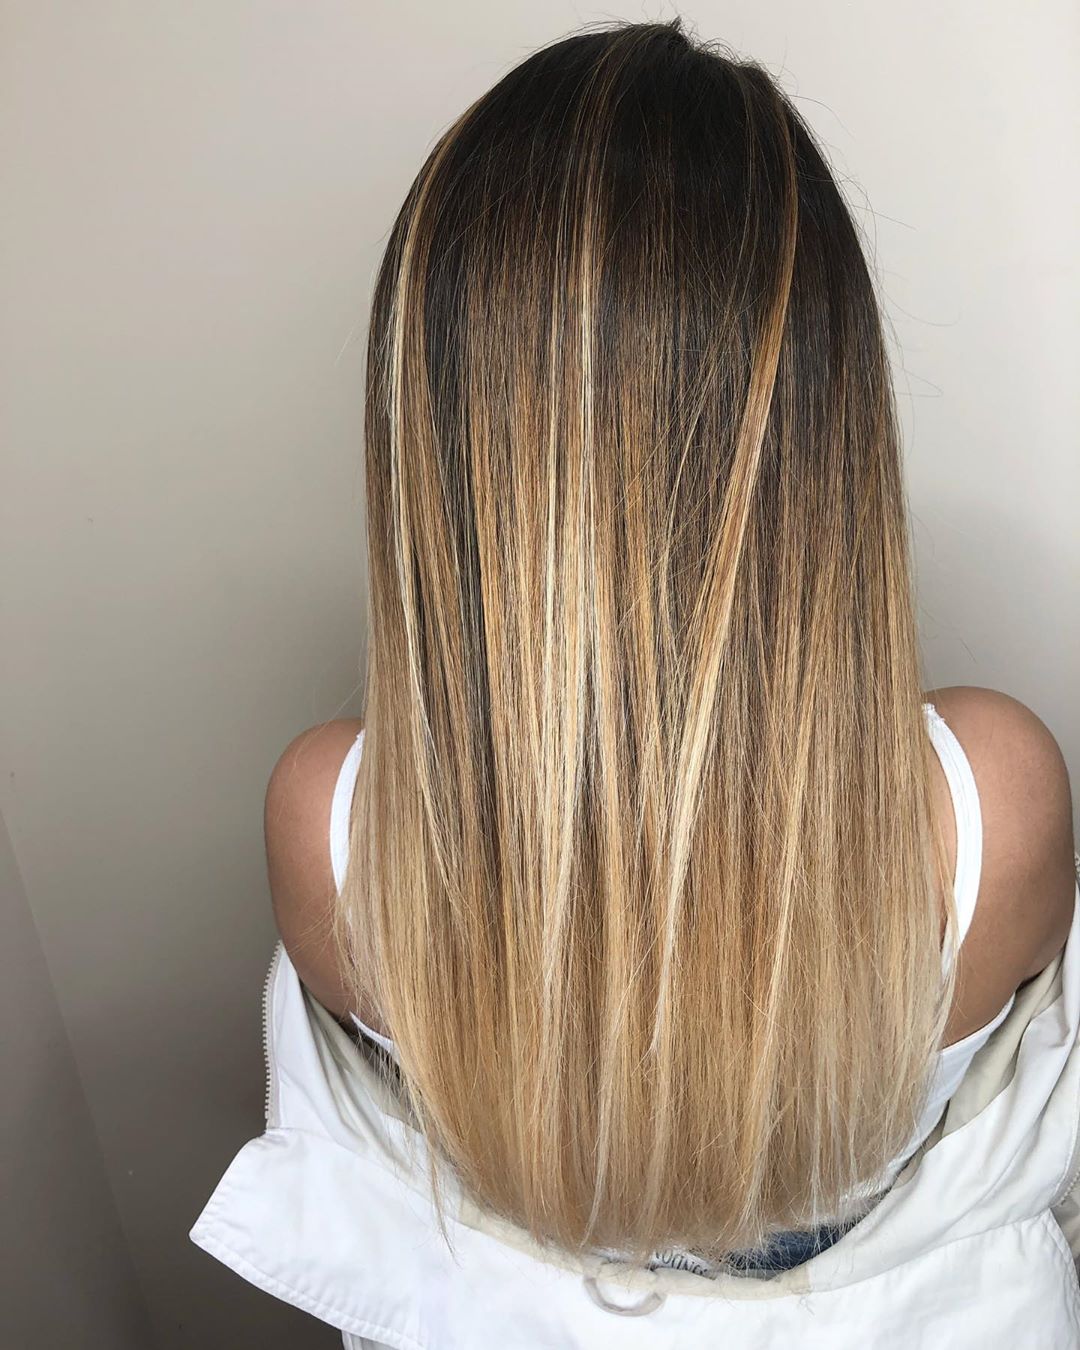 The Classic Dark Brown to Blonde Ombre for Tan Skin Tone